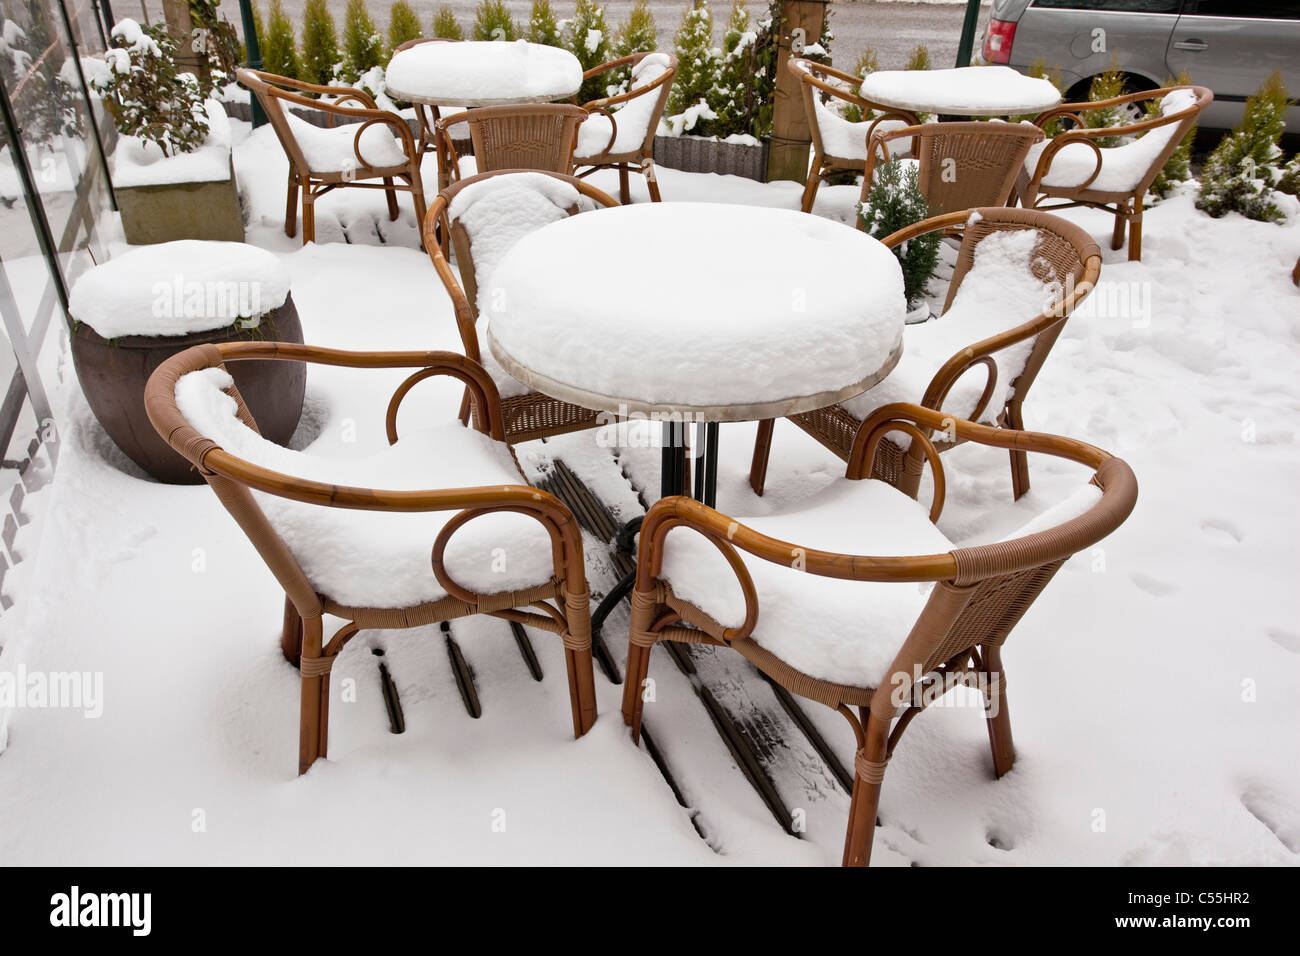 The Netherlands, Slenaken, Chairs of outdoor cafe, covered with snow. Stock Photo